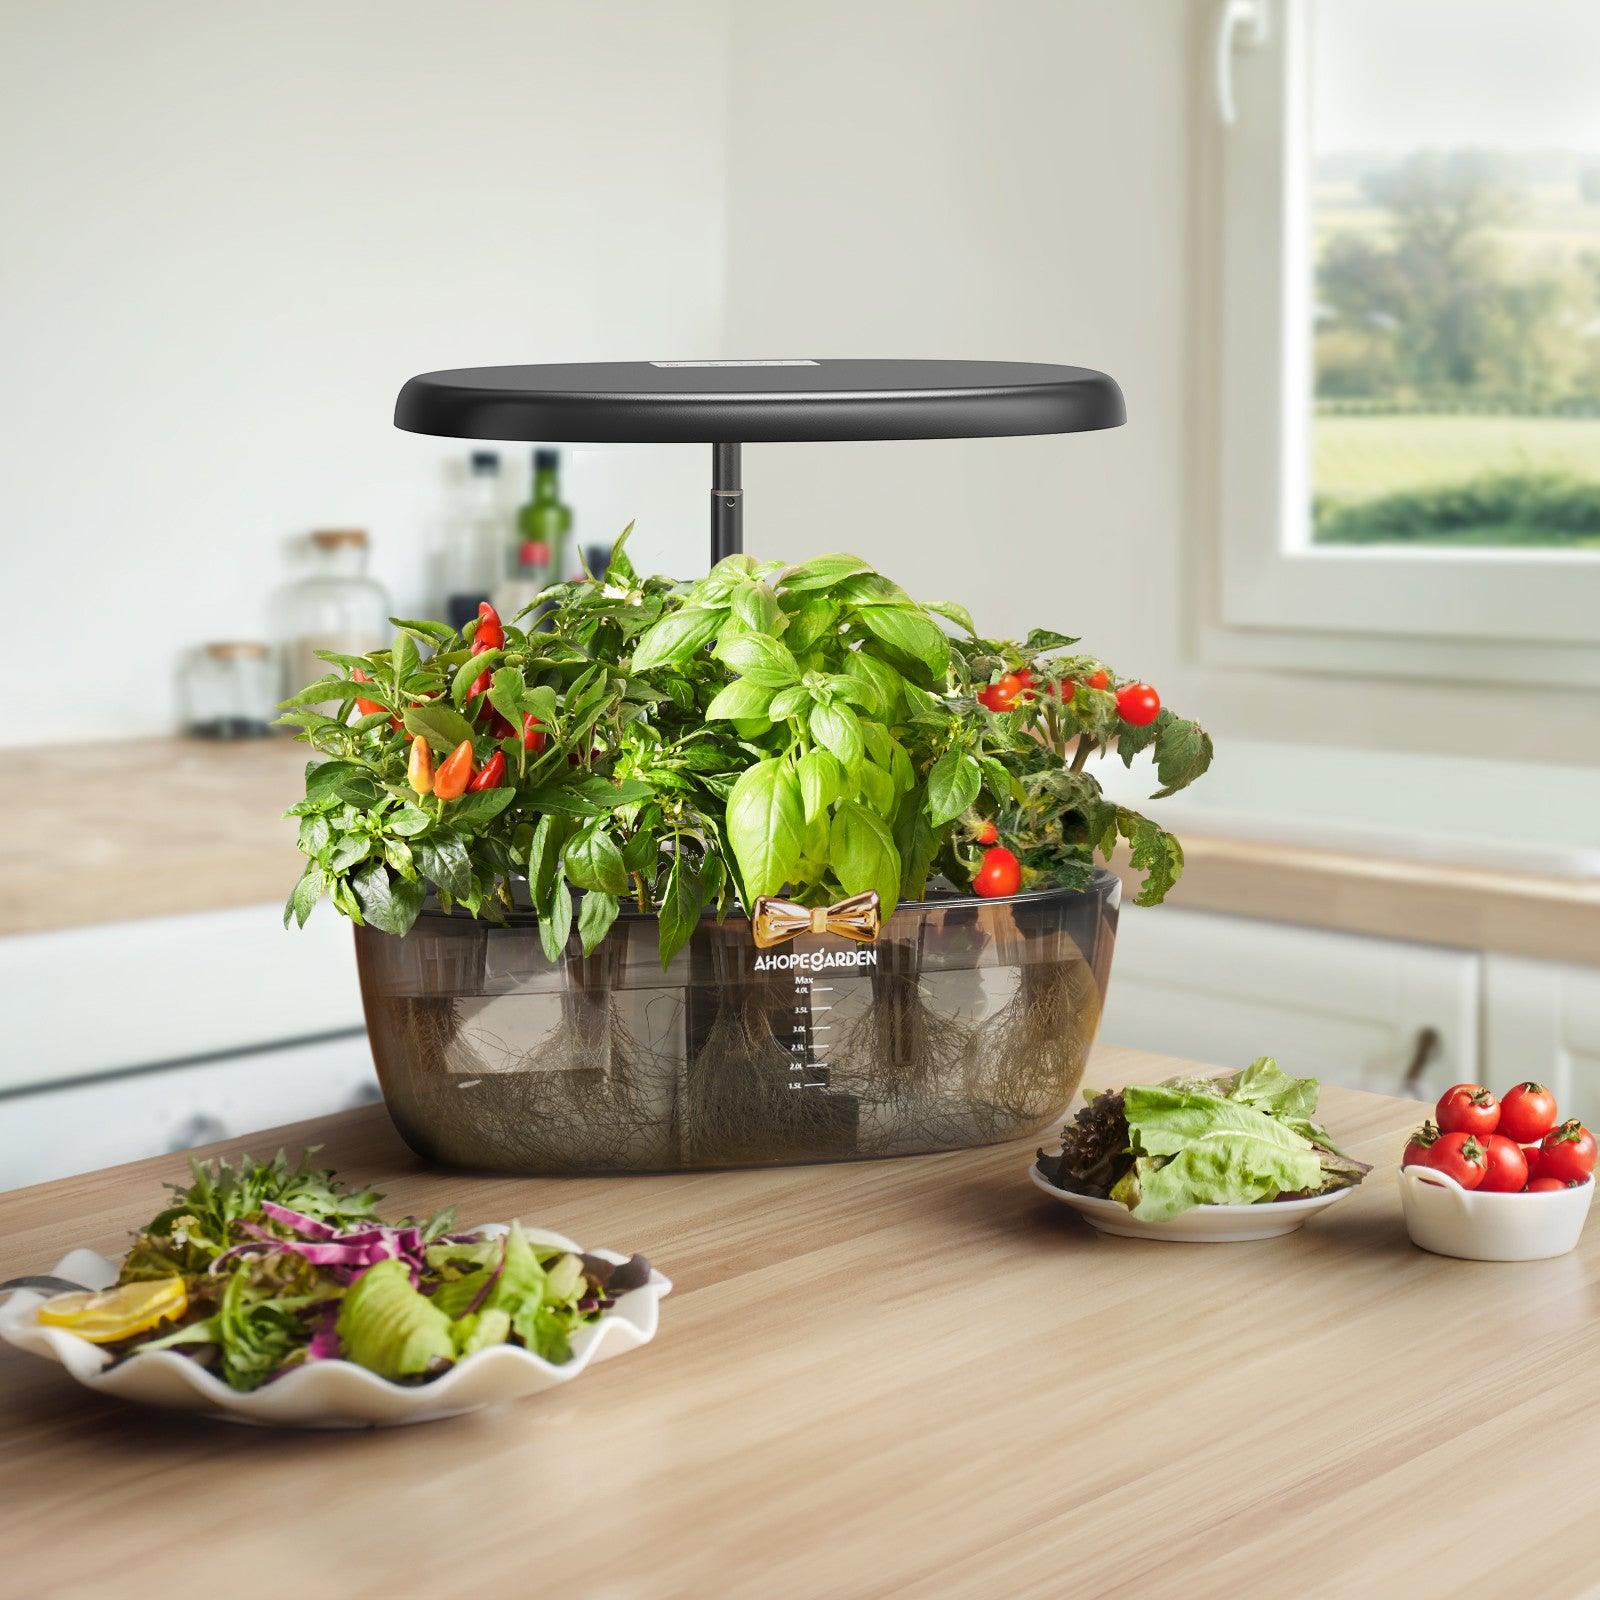 Kitchen lush with Ahope Transparent Smart Garden Hydroponic System